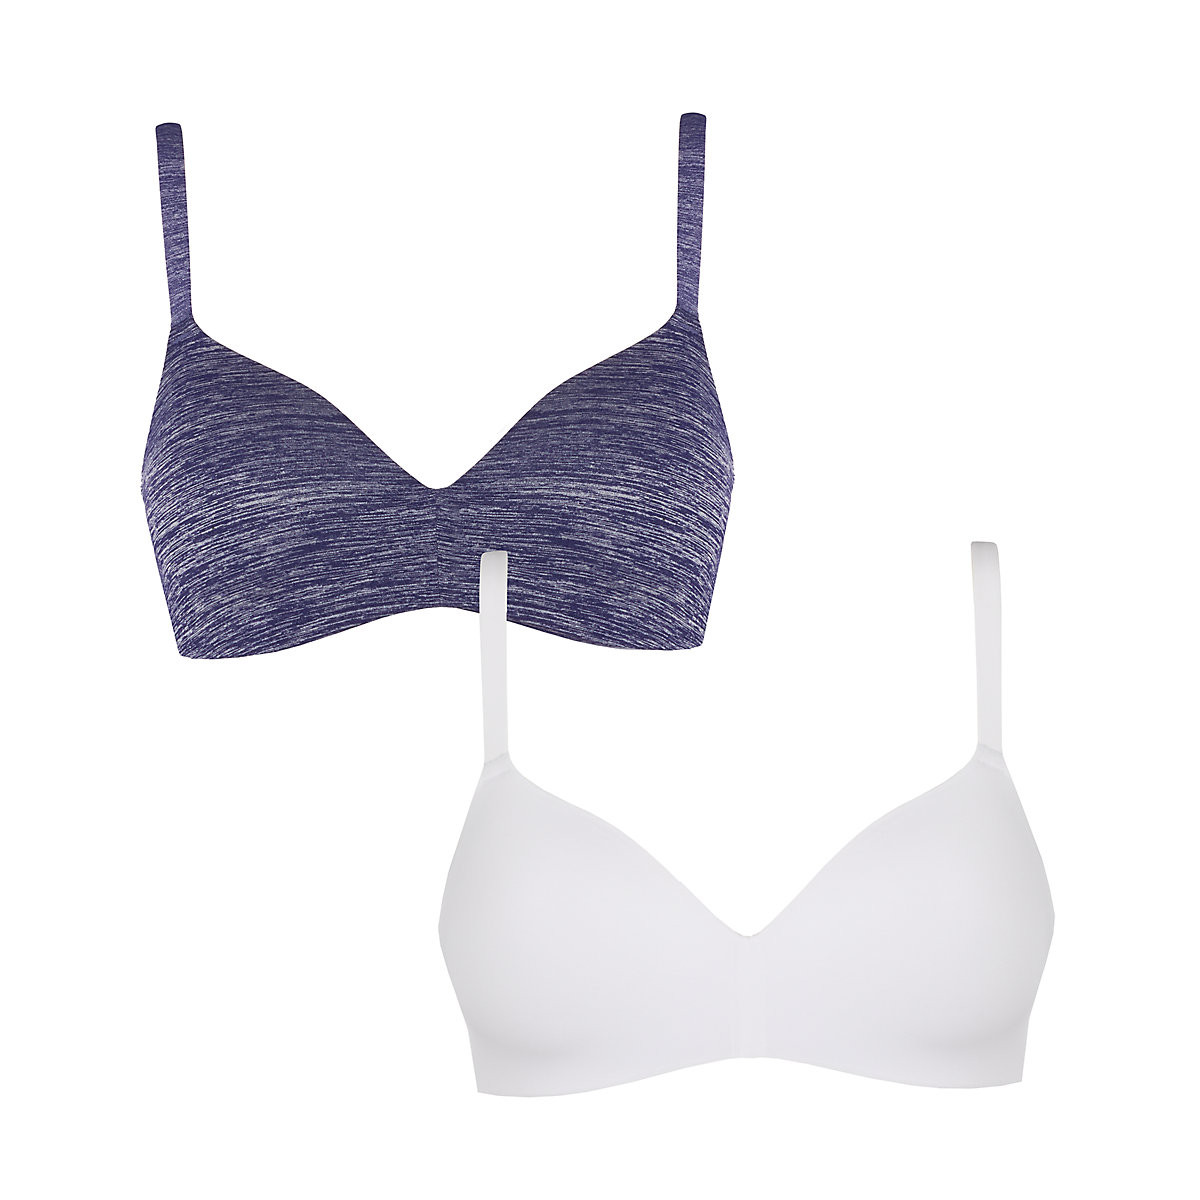 Mothercare Maternity T-shirt Bras - Reviews